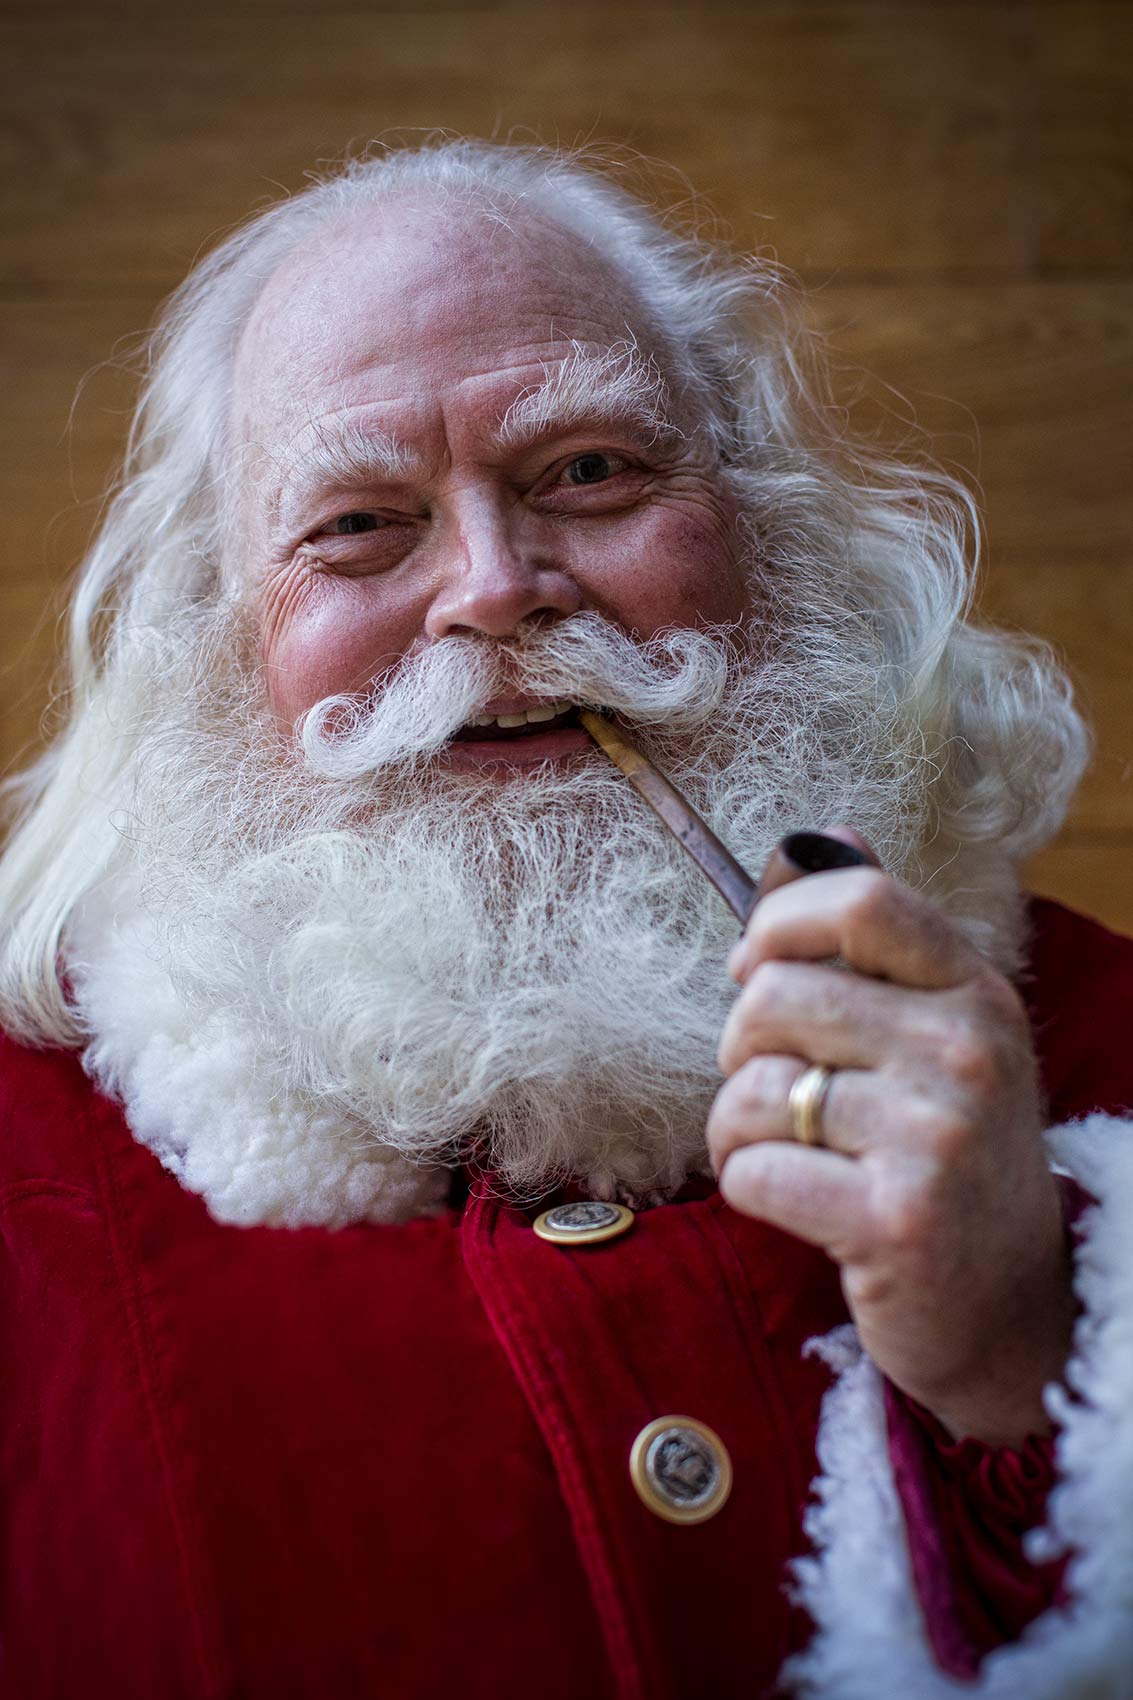 SANTA-SMILING-WITH-PIPE